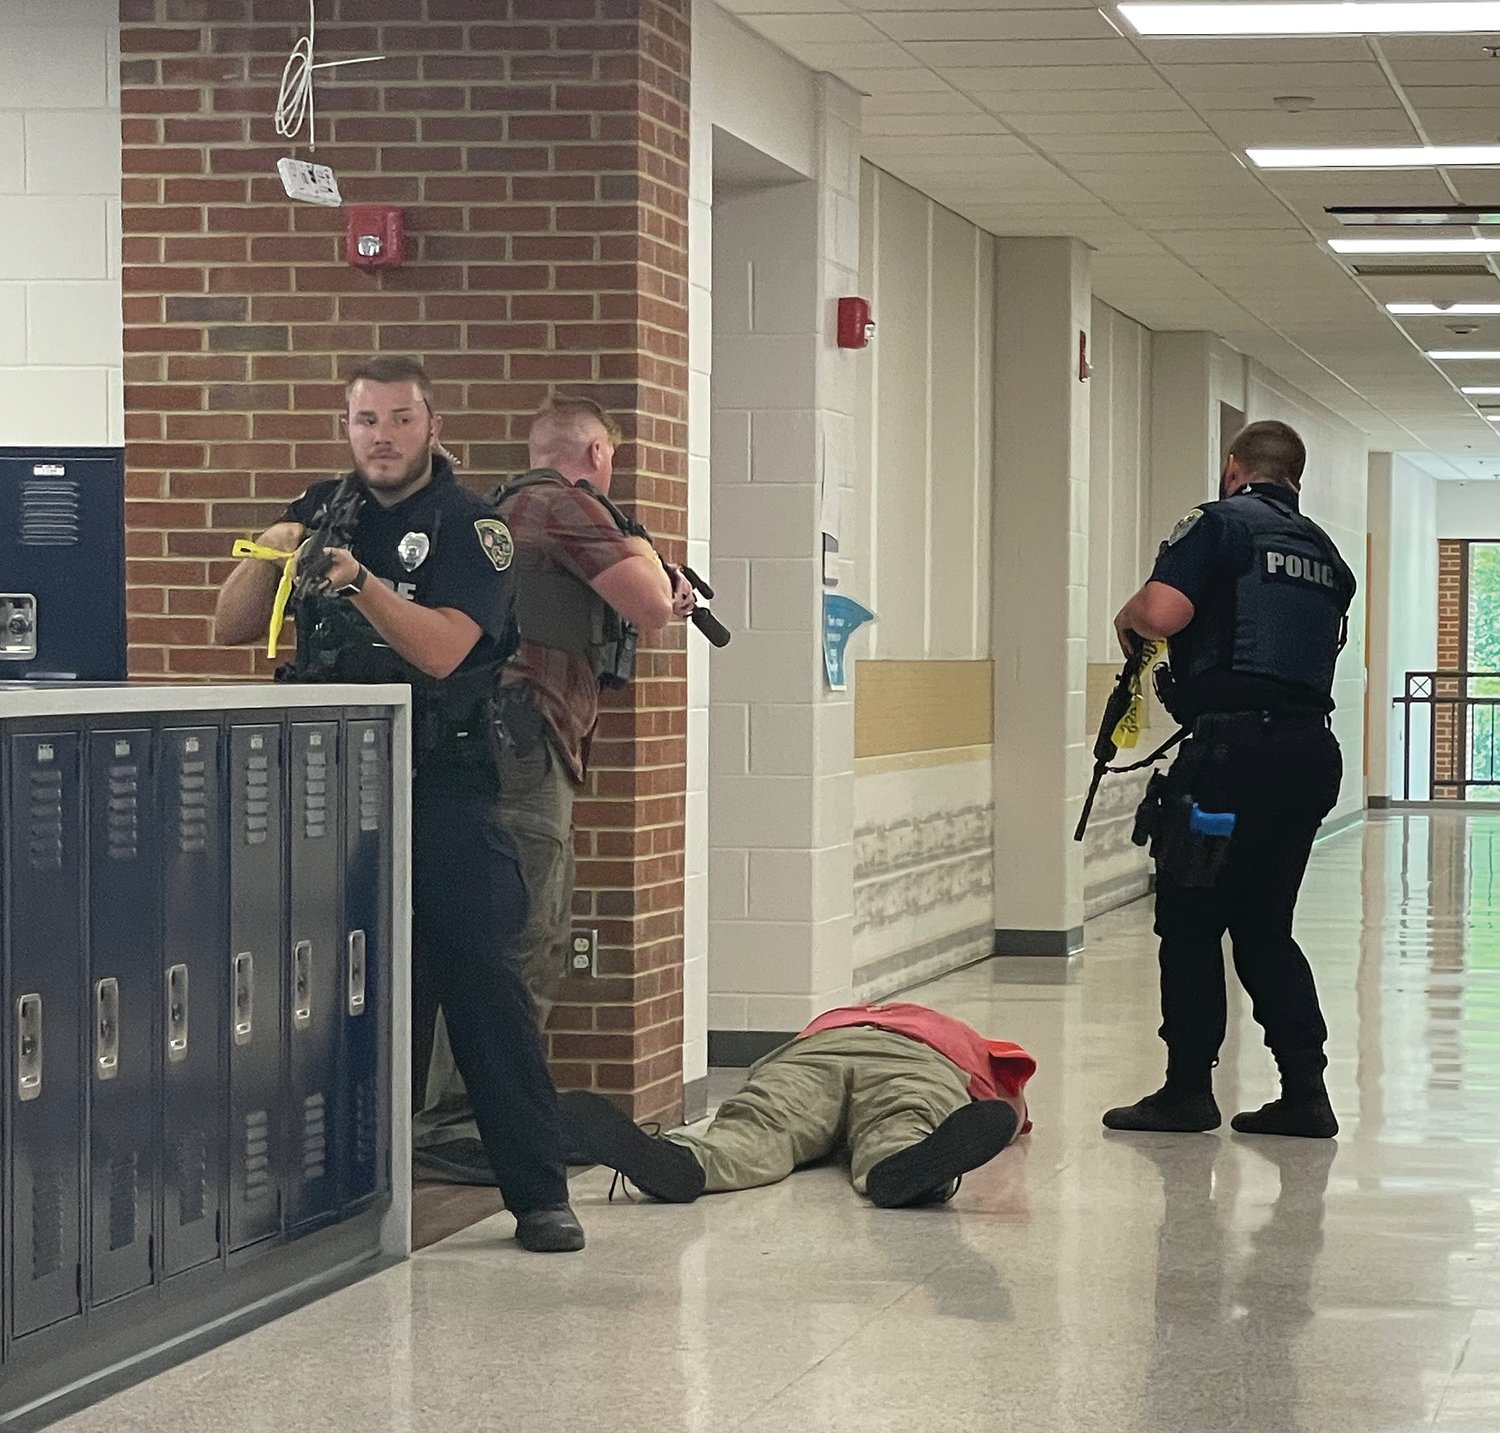 About 100 emergency responders and actors participate Wednesday in a full scale active shooter exercise at Crawfordsville High School.